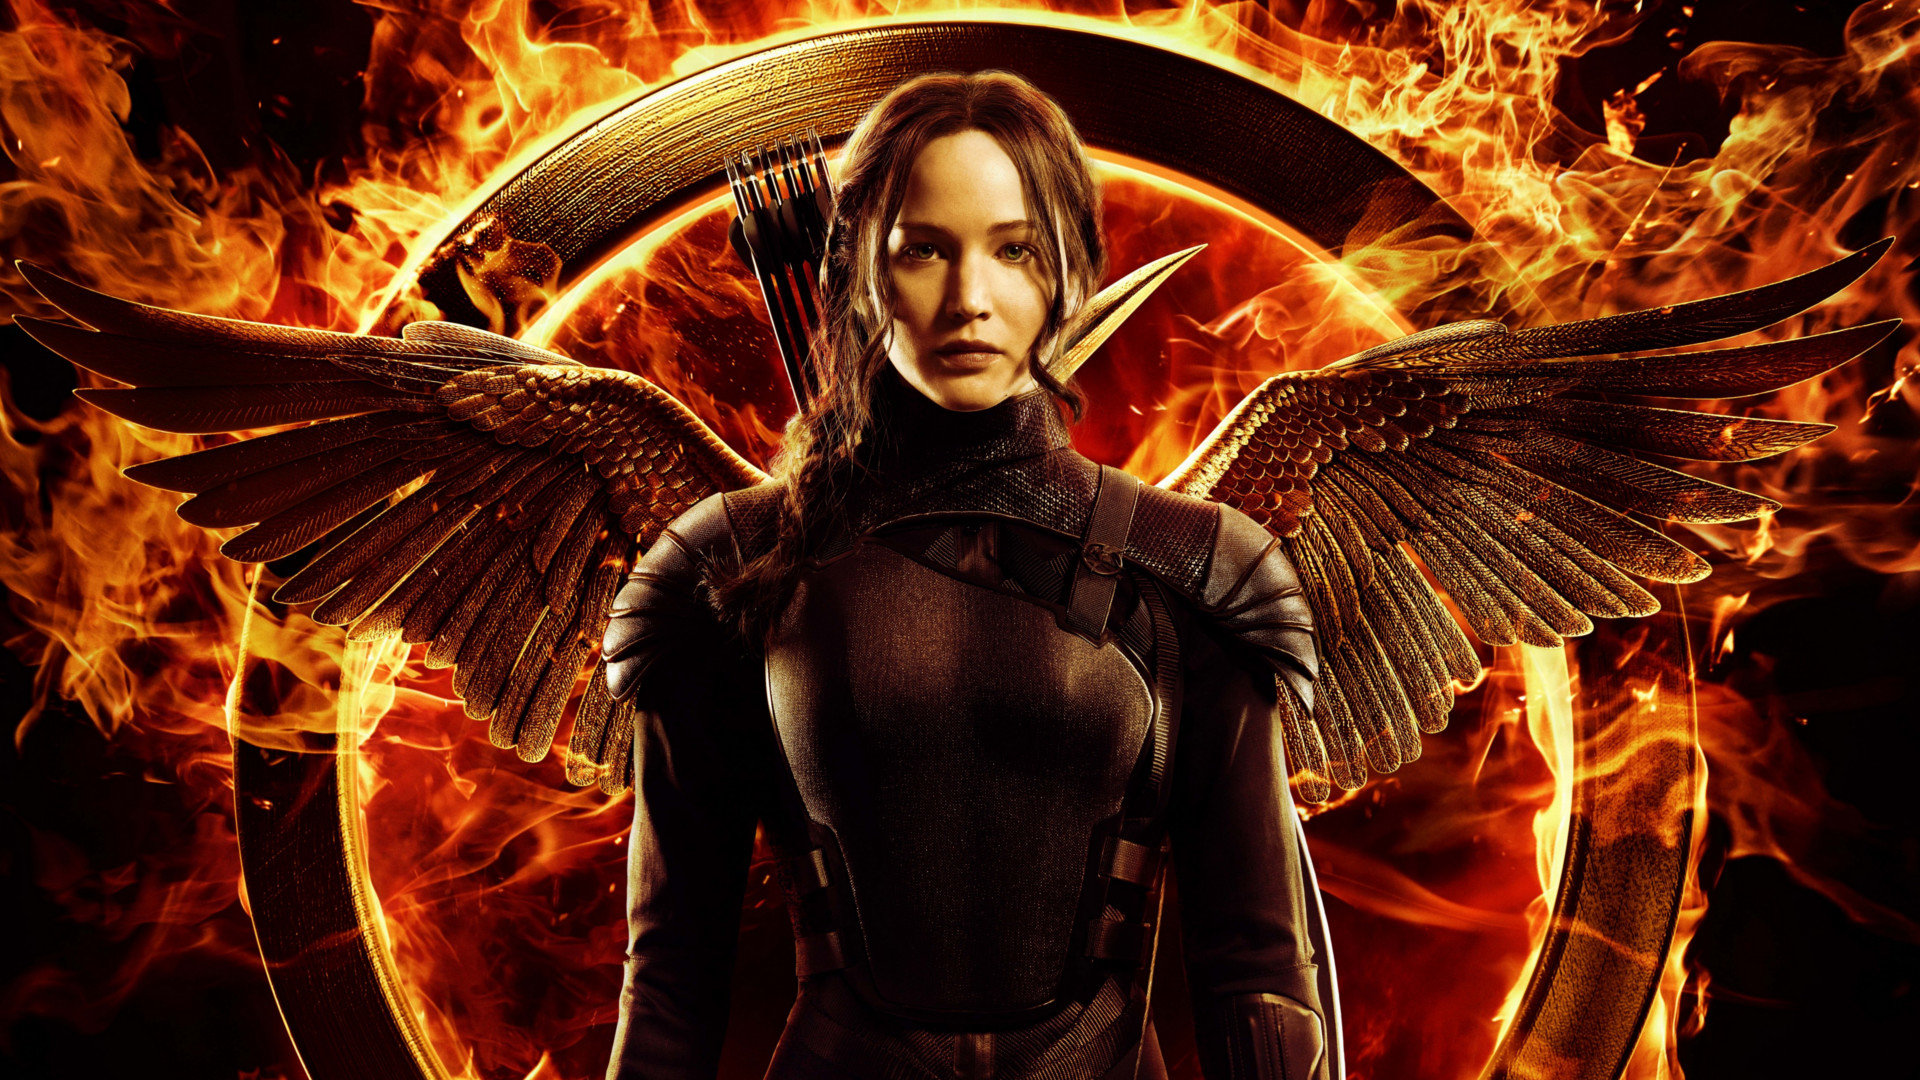 Best The Hunger Games: Mockingjay - Part 1 wallpaper ID:91225 for High Resolution full hd computer